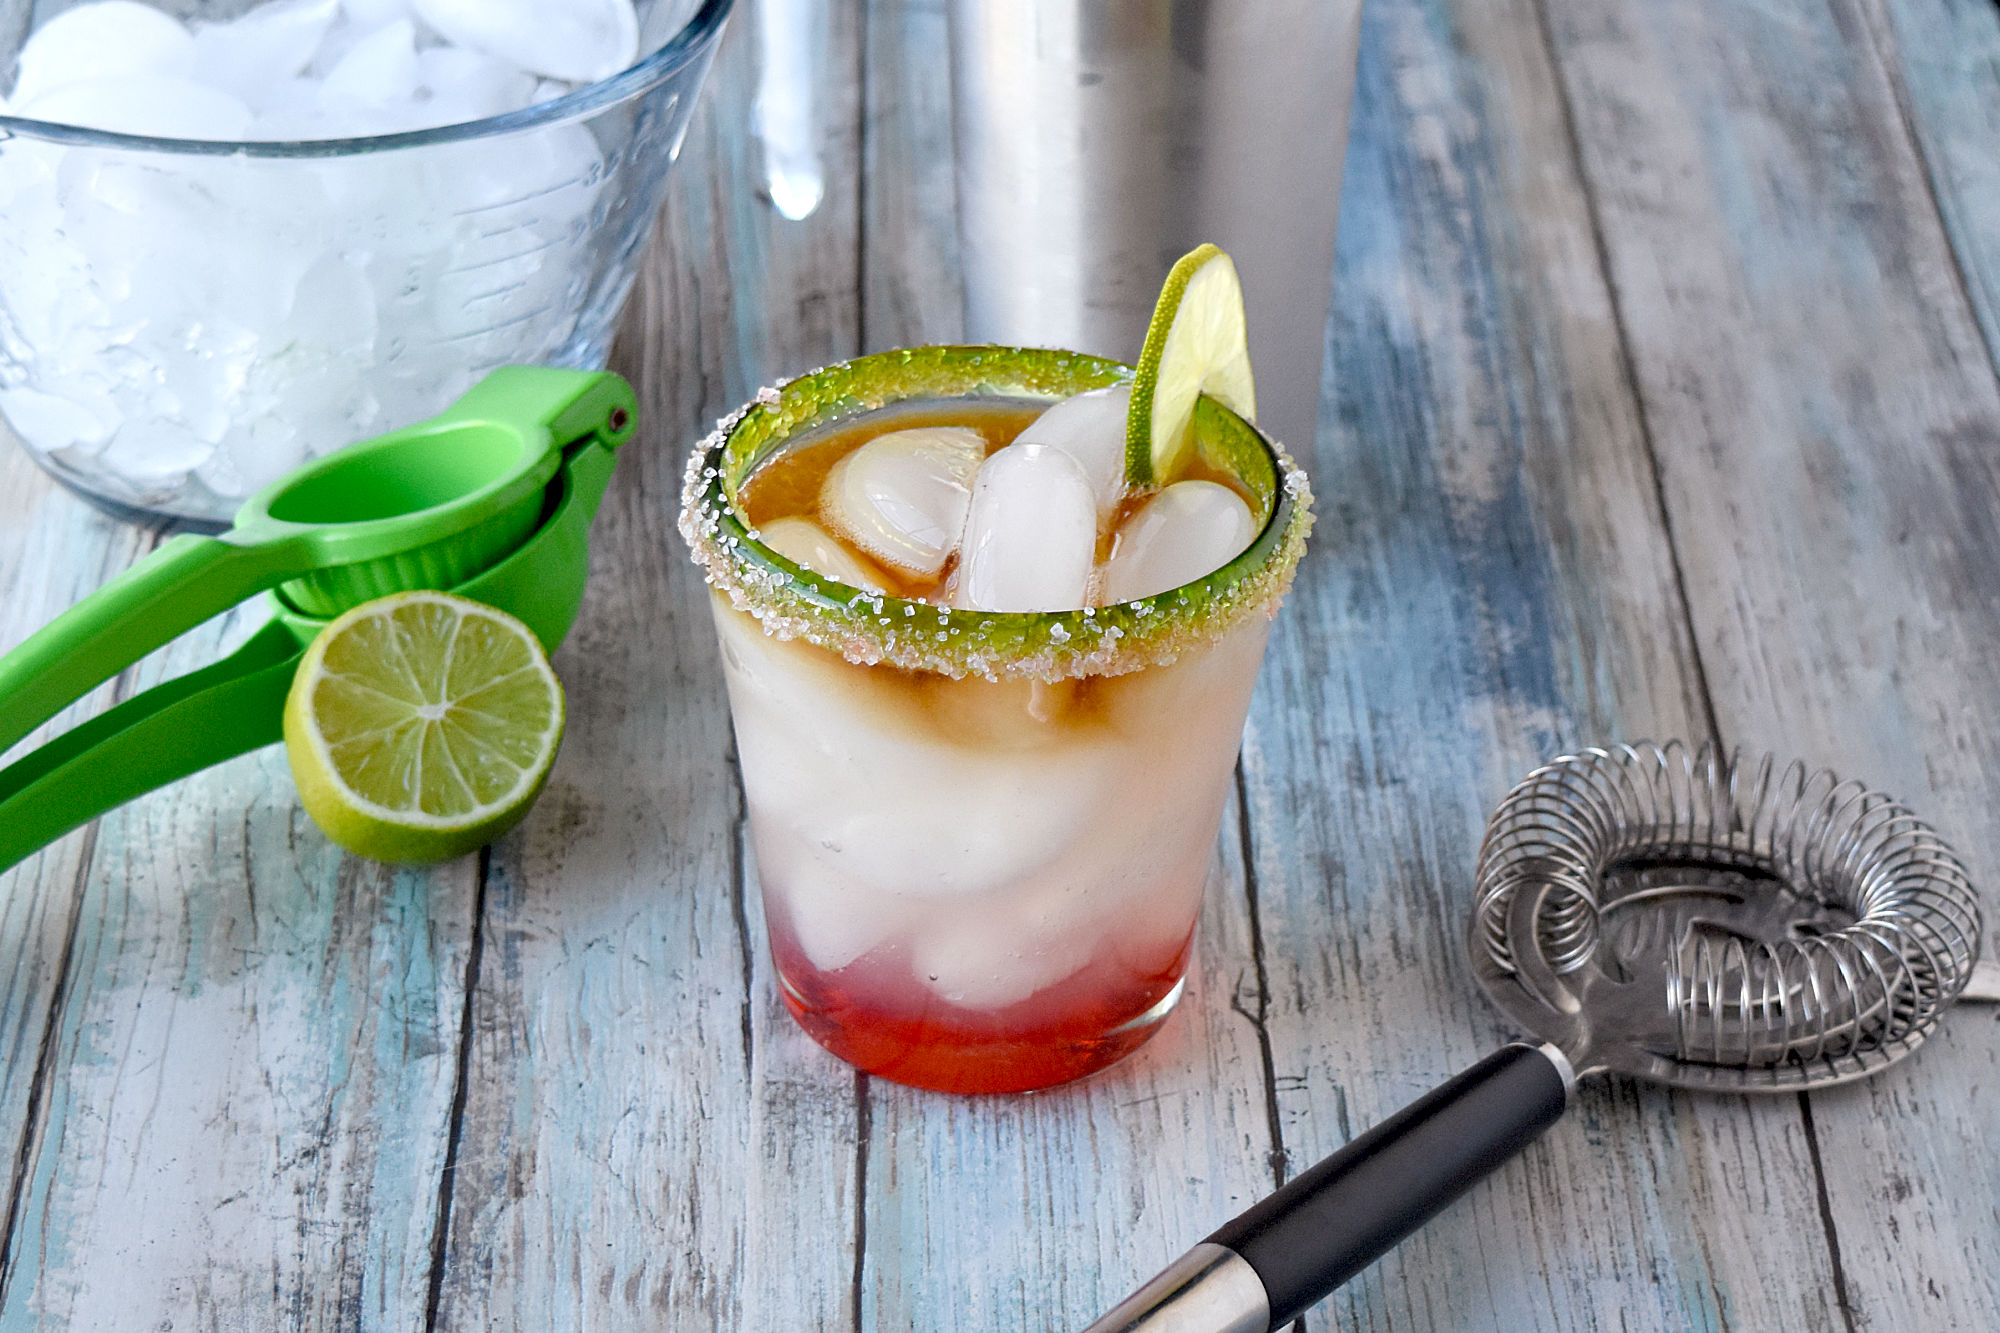 Mai Tai Margarita has the flavors of the tropical Mai Tai and refreshing margarita. Grenadine is in the bottom, the margarita with coconut rum is in the middle, and dark rum floated on top for a deliciously layered drink. #OurFamilyTable